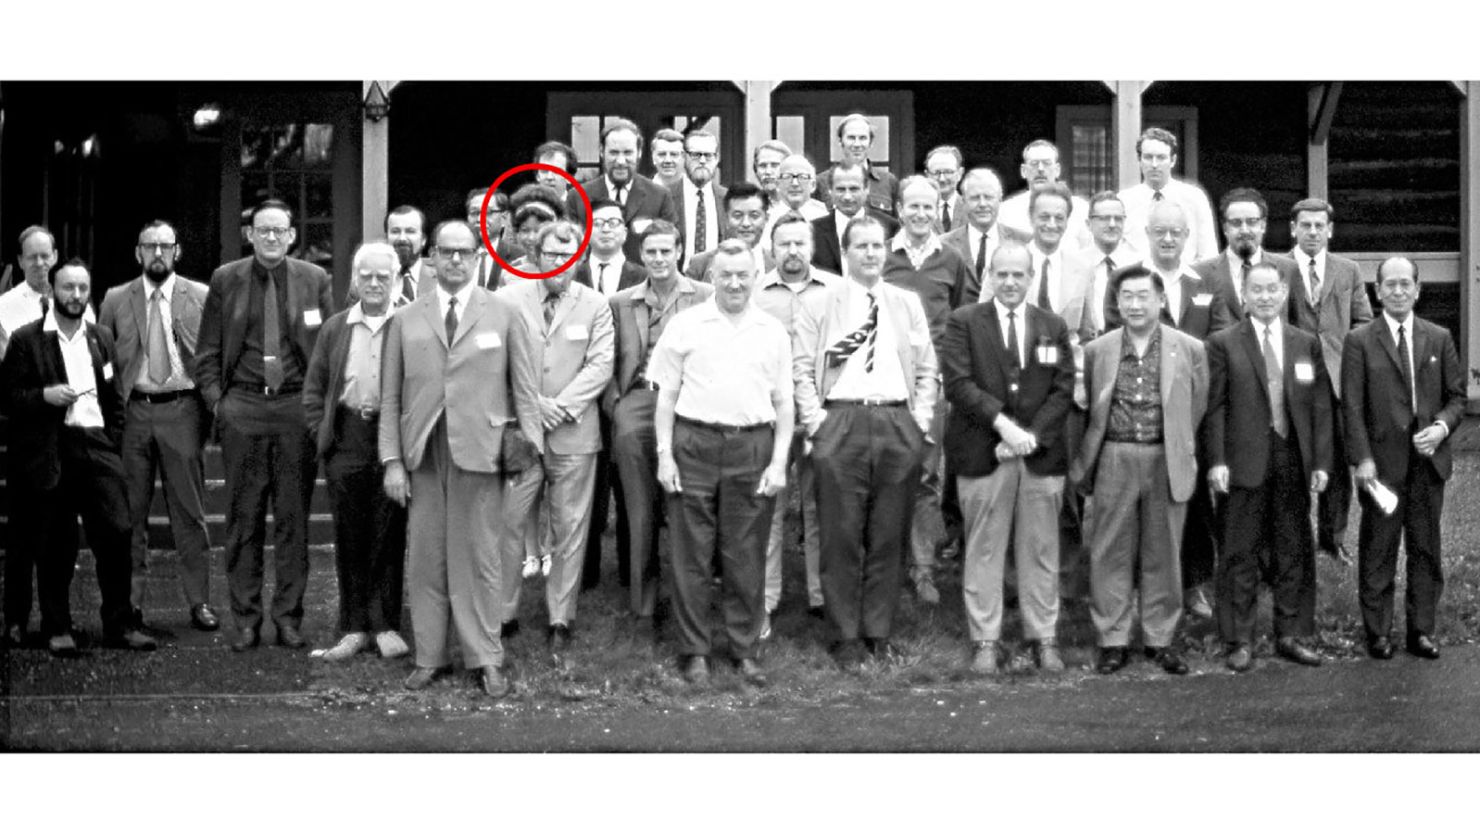 This lone woman at a 1971 gathering of scientists sparked a flurry of amateur sleuthing on Twitter.